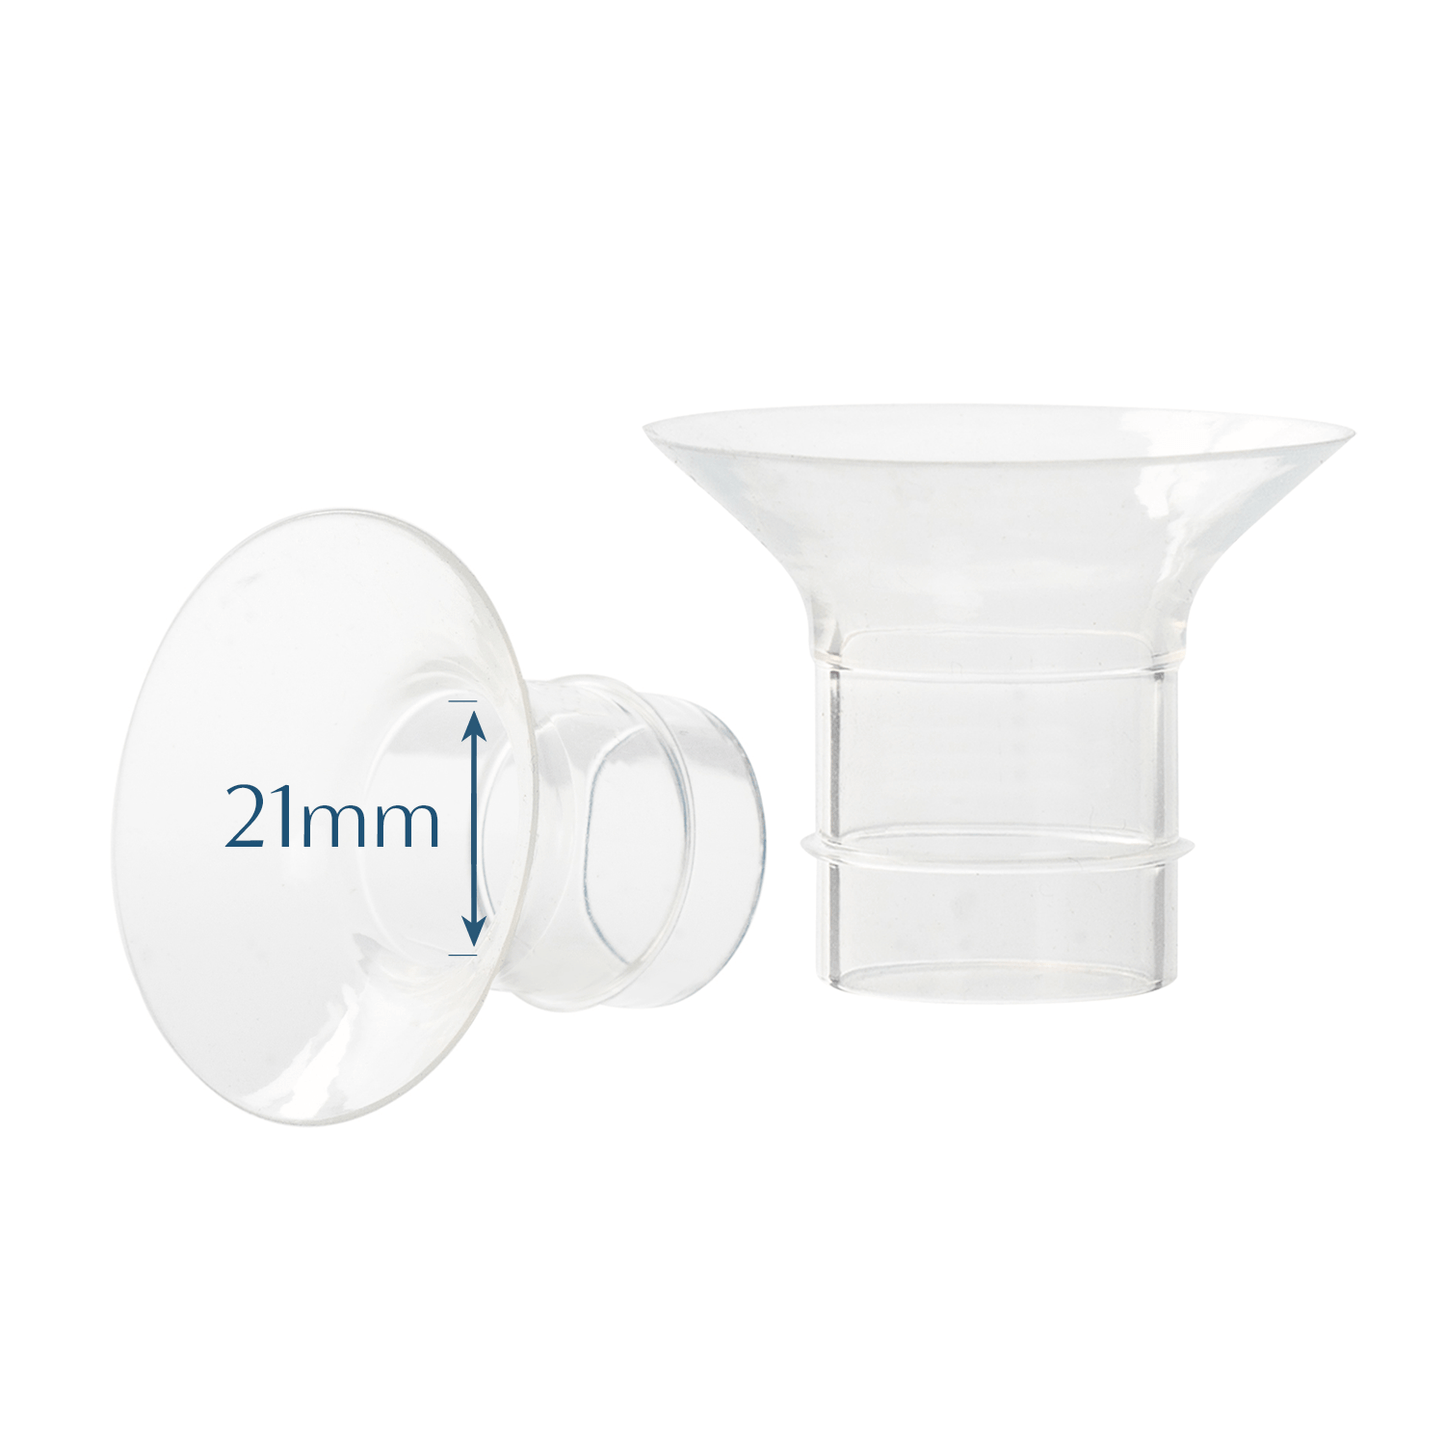 idaho jones flange inserts (21mm) as component of pump-a-collect milk collection cups